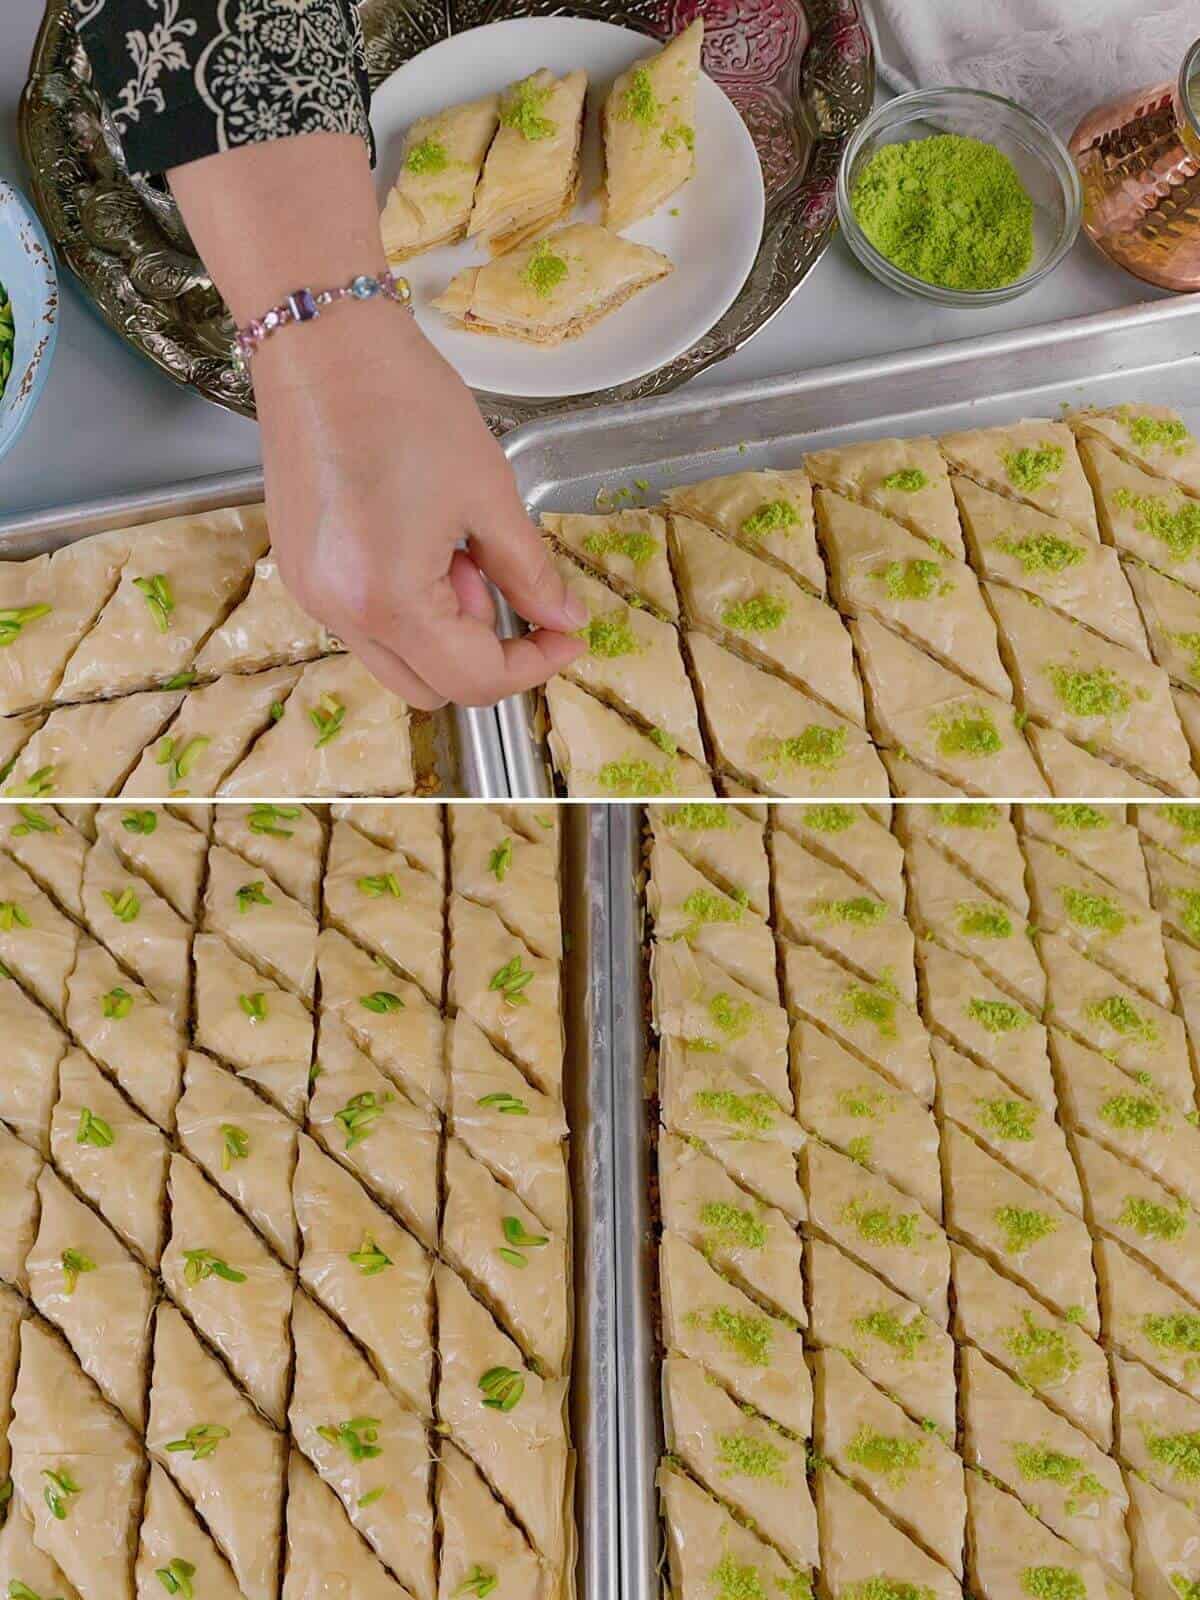 Pistachios being used to decorate the middle eastern pastry.